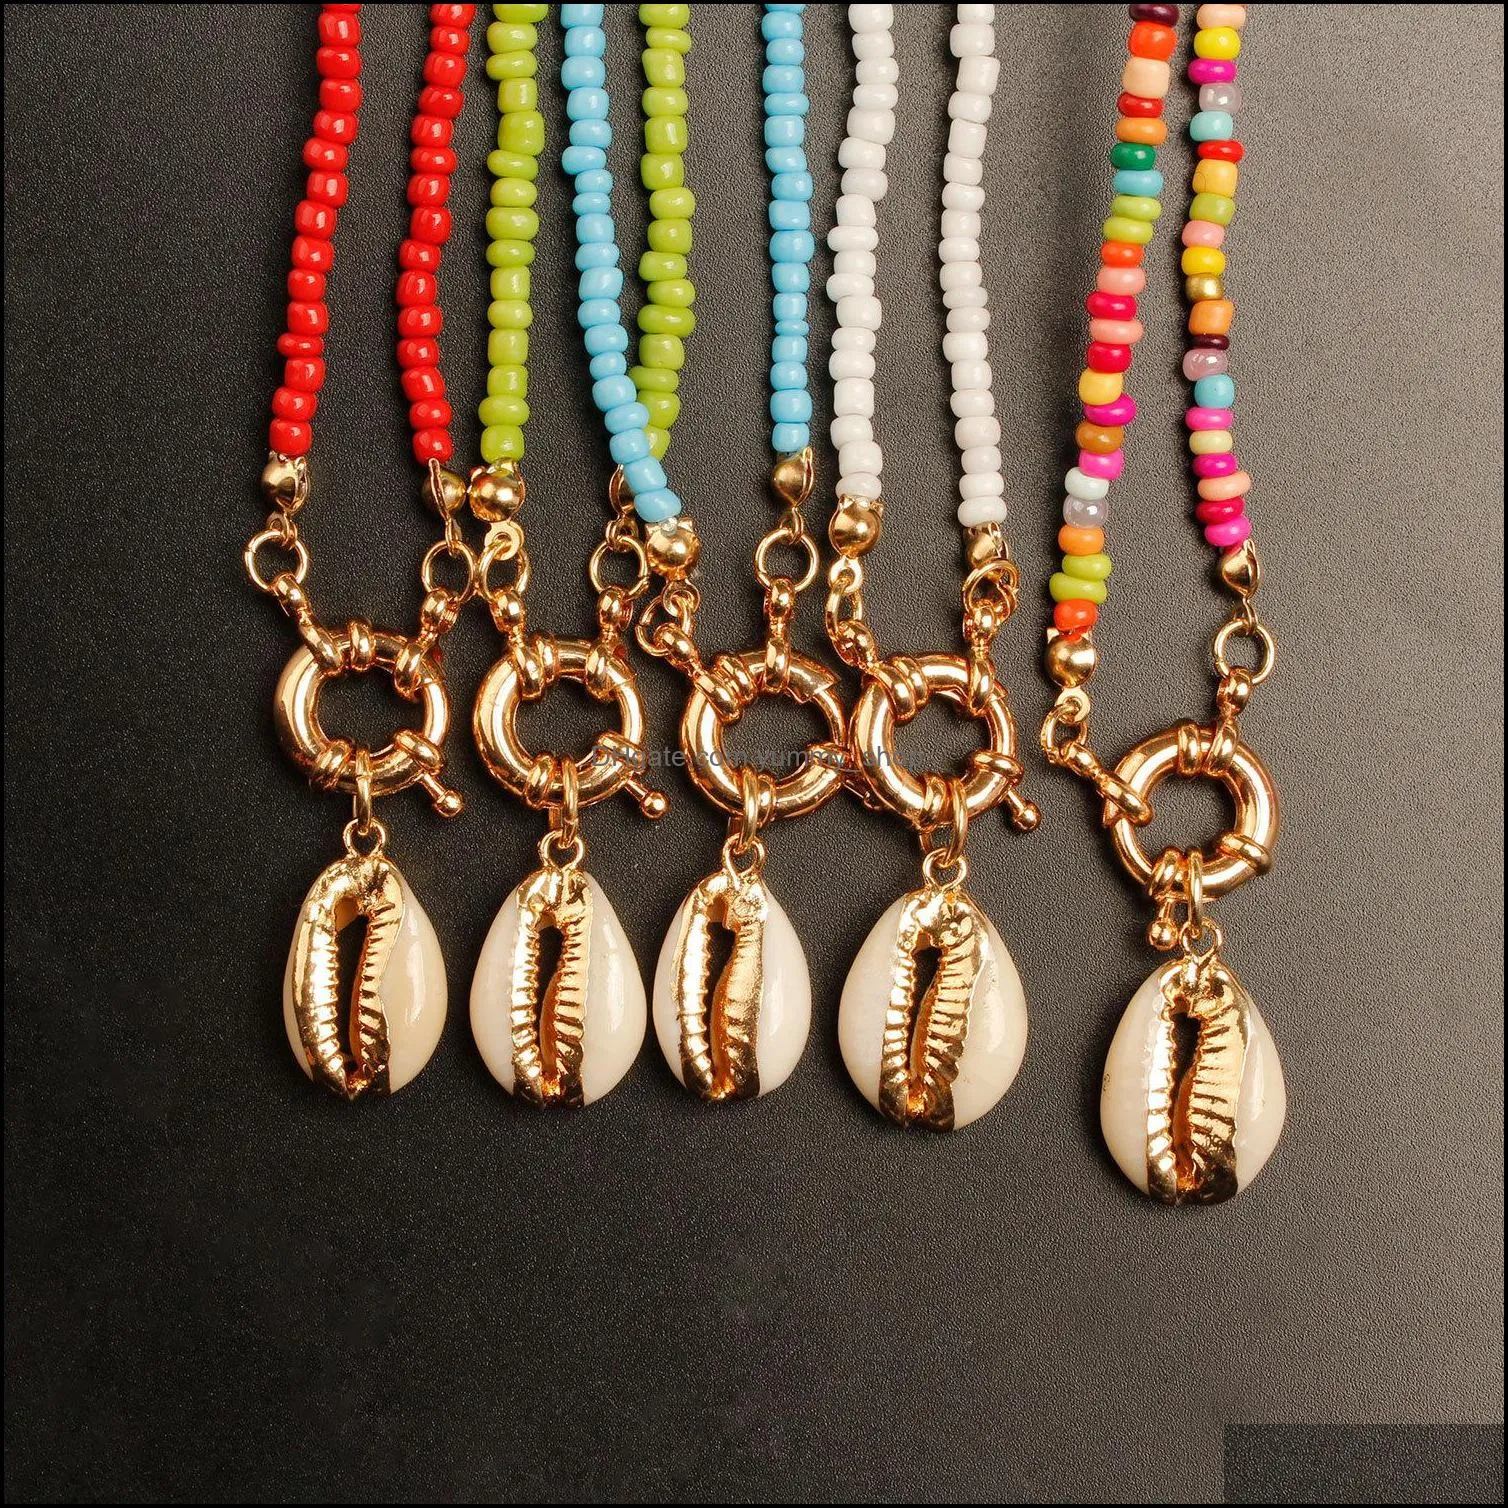 fashion creative shell pendant necklace womens boho retro summer gothic beads hand threaded colorful rope rice beads shell pendant